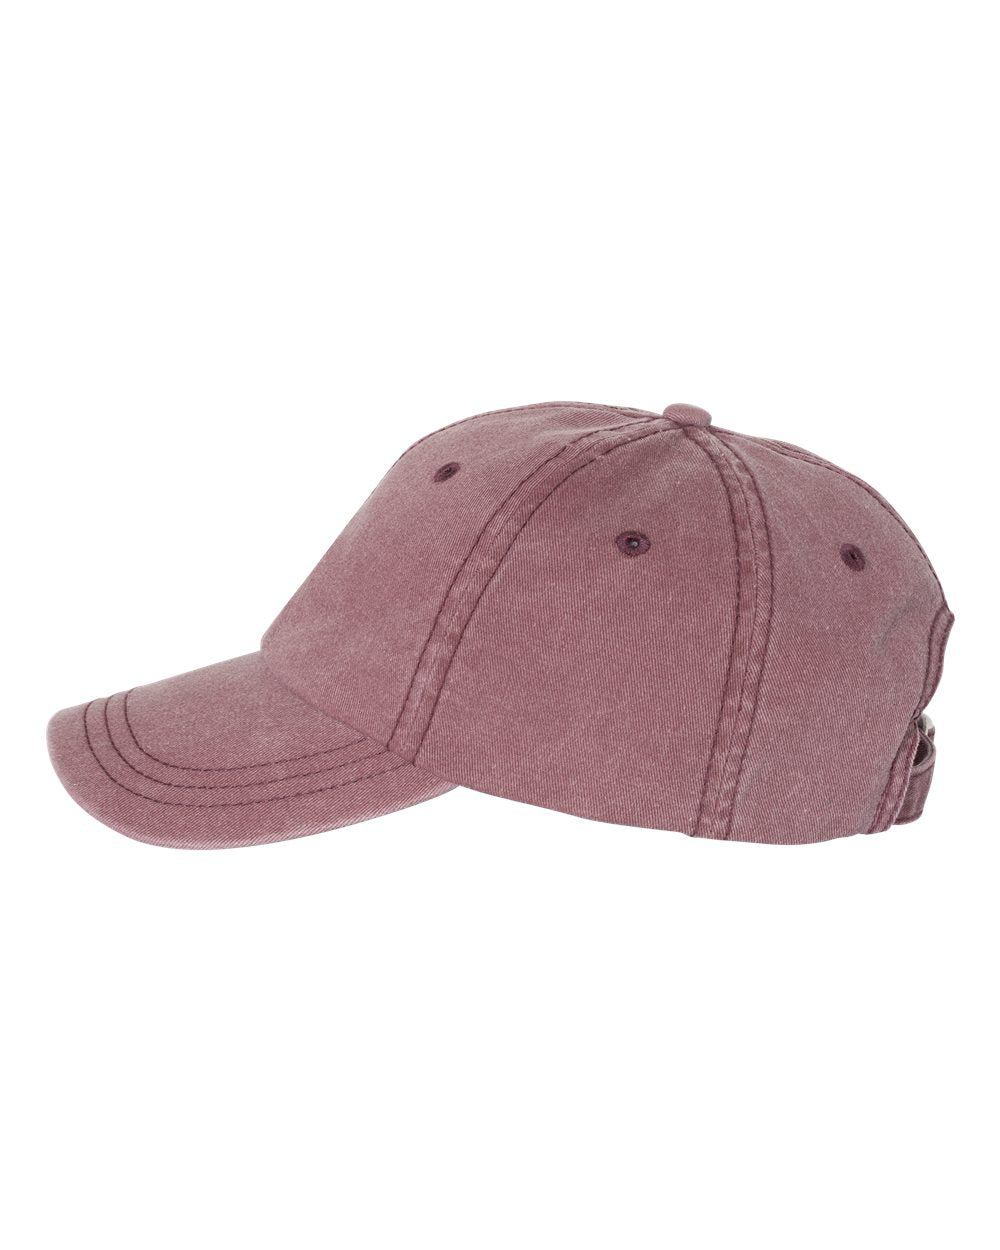 Adult Pigment-Dyed Cap, Maroon